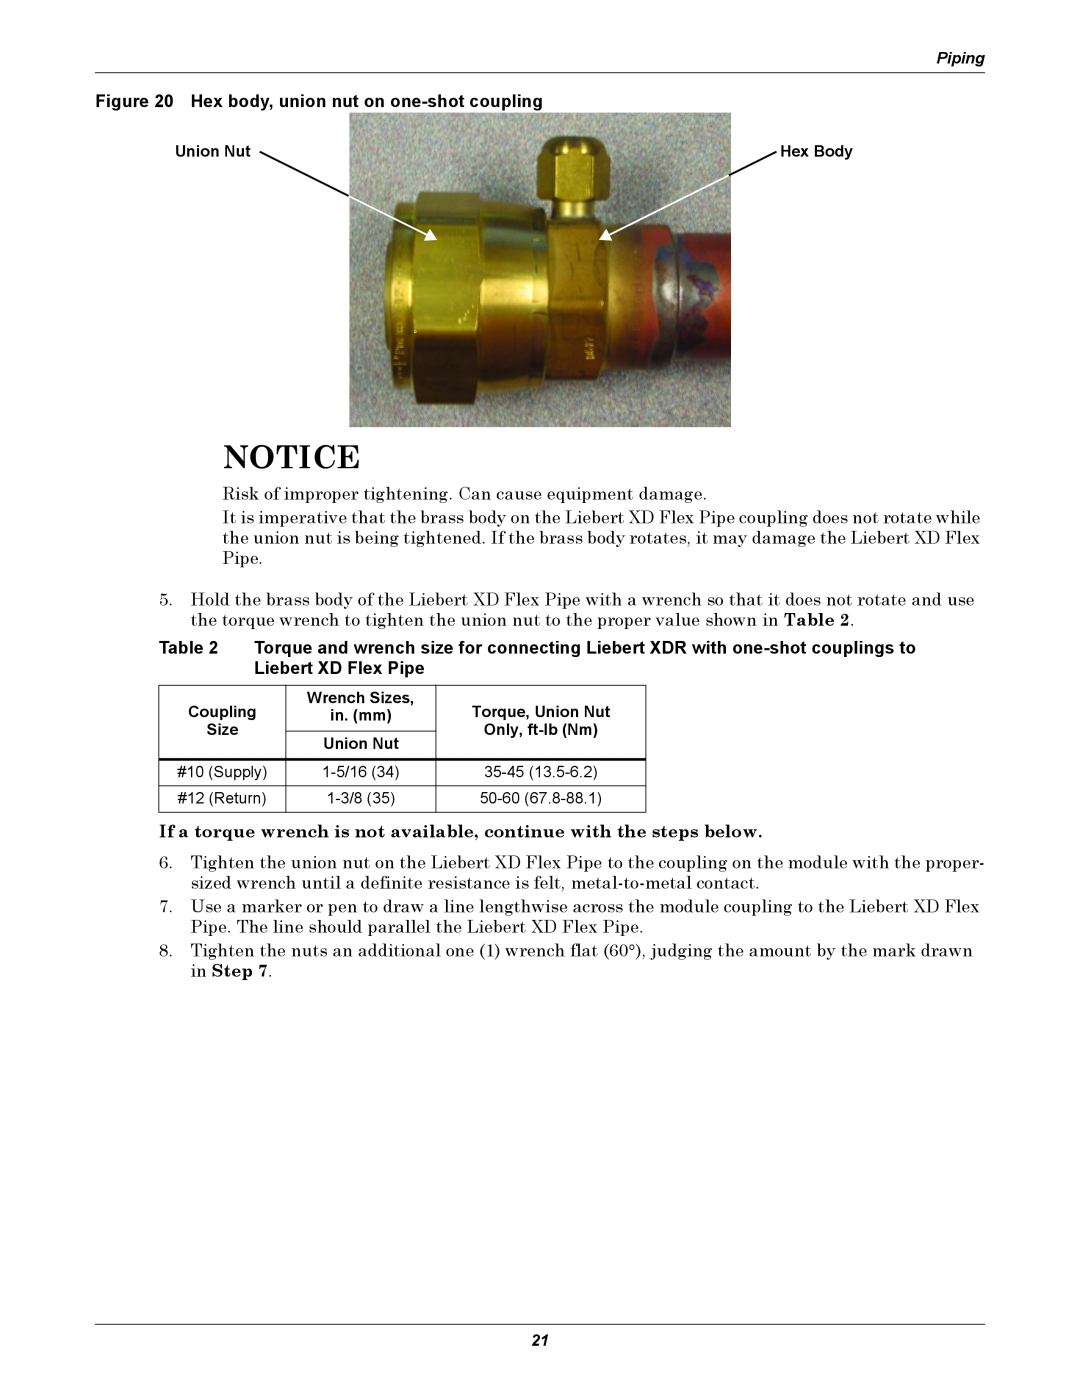 Emerson XDR user manual Hex body, union nut on one-shotcoupling, Piping 